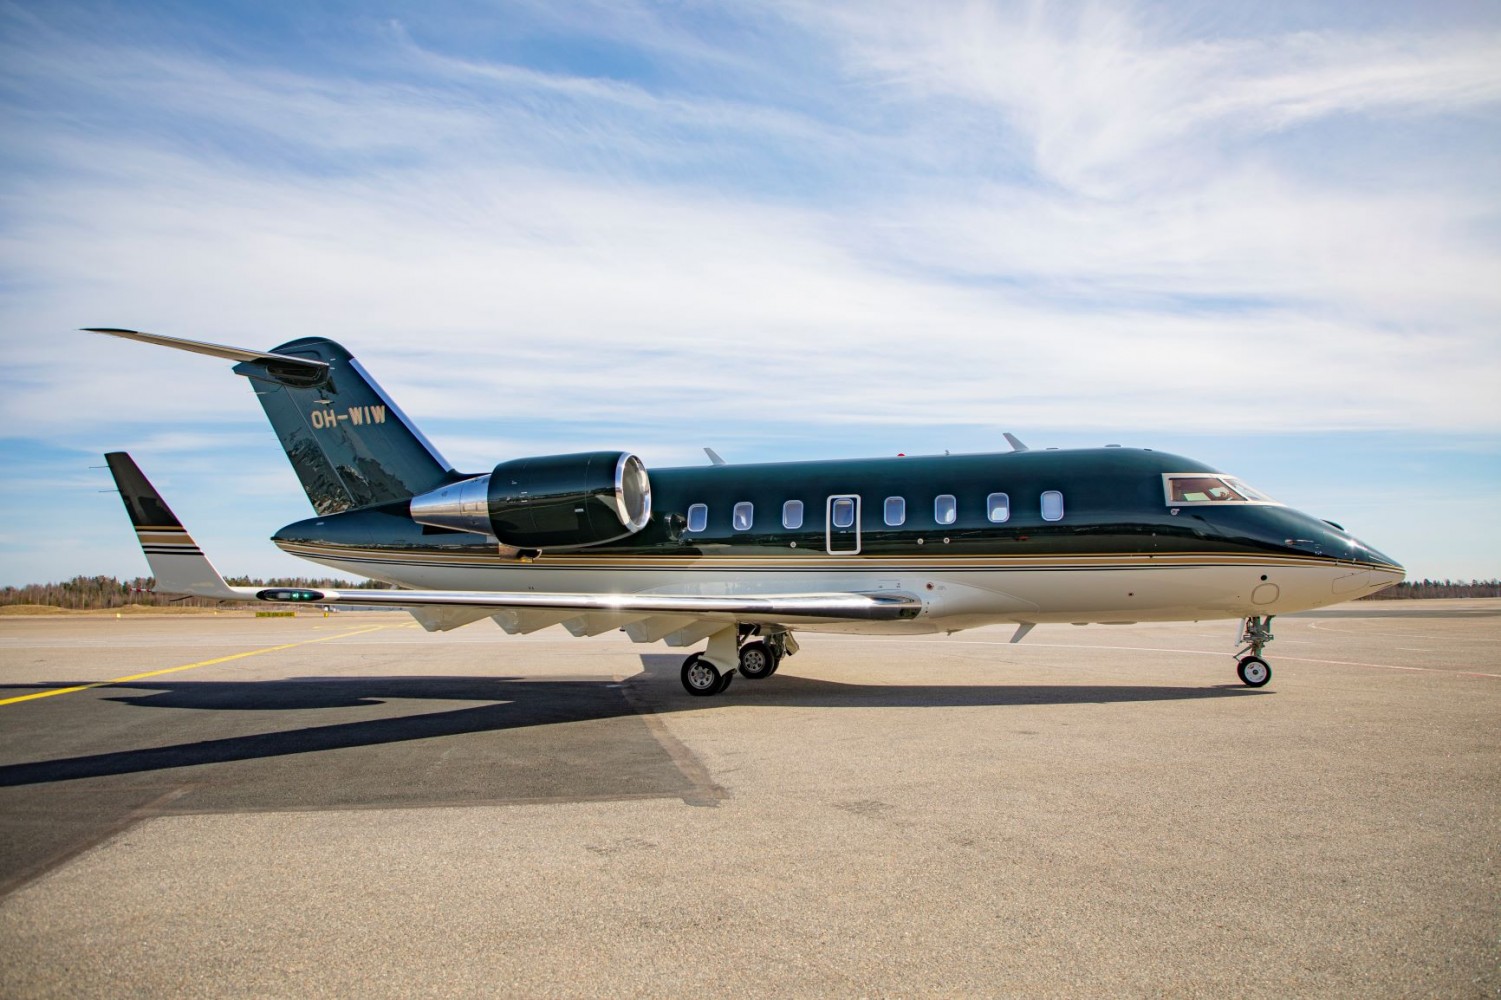 Challenger 650 aircraft, image courtesy of Jetflite.